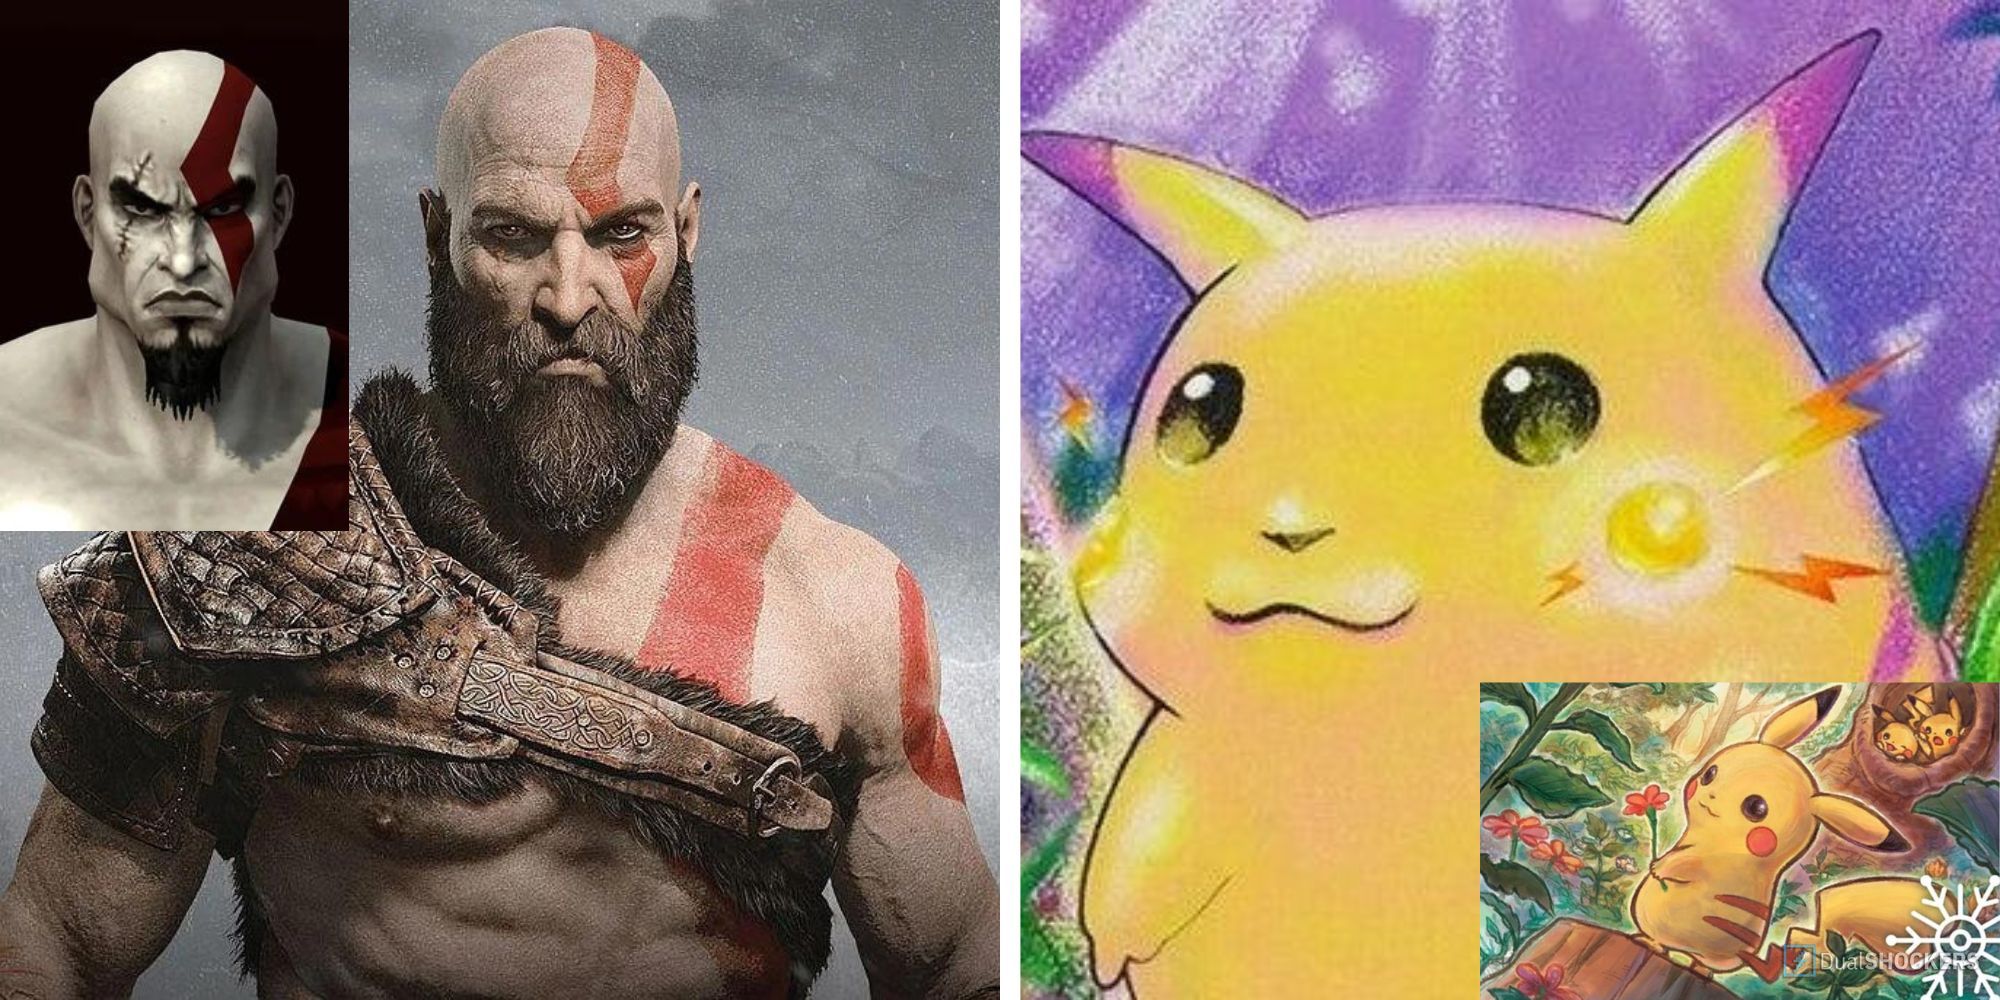 Kratos and Pikachu compared to other designs